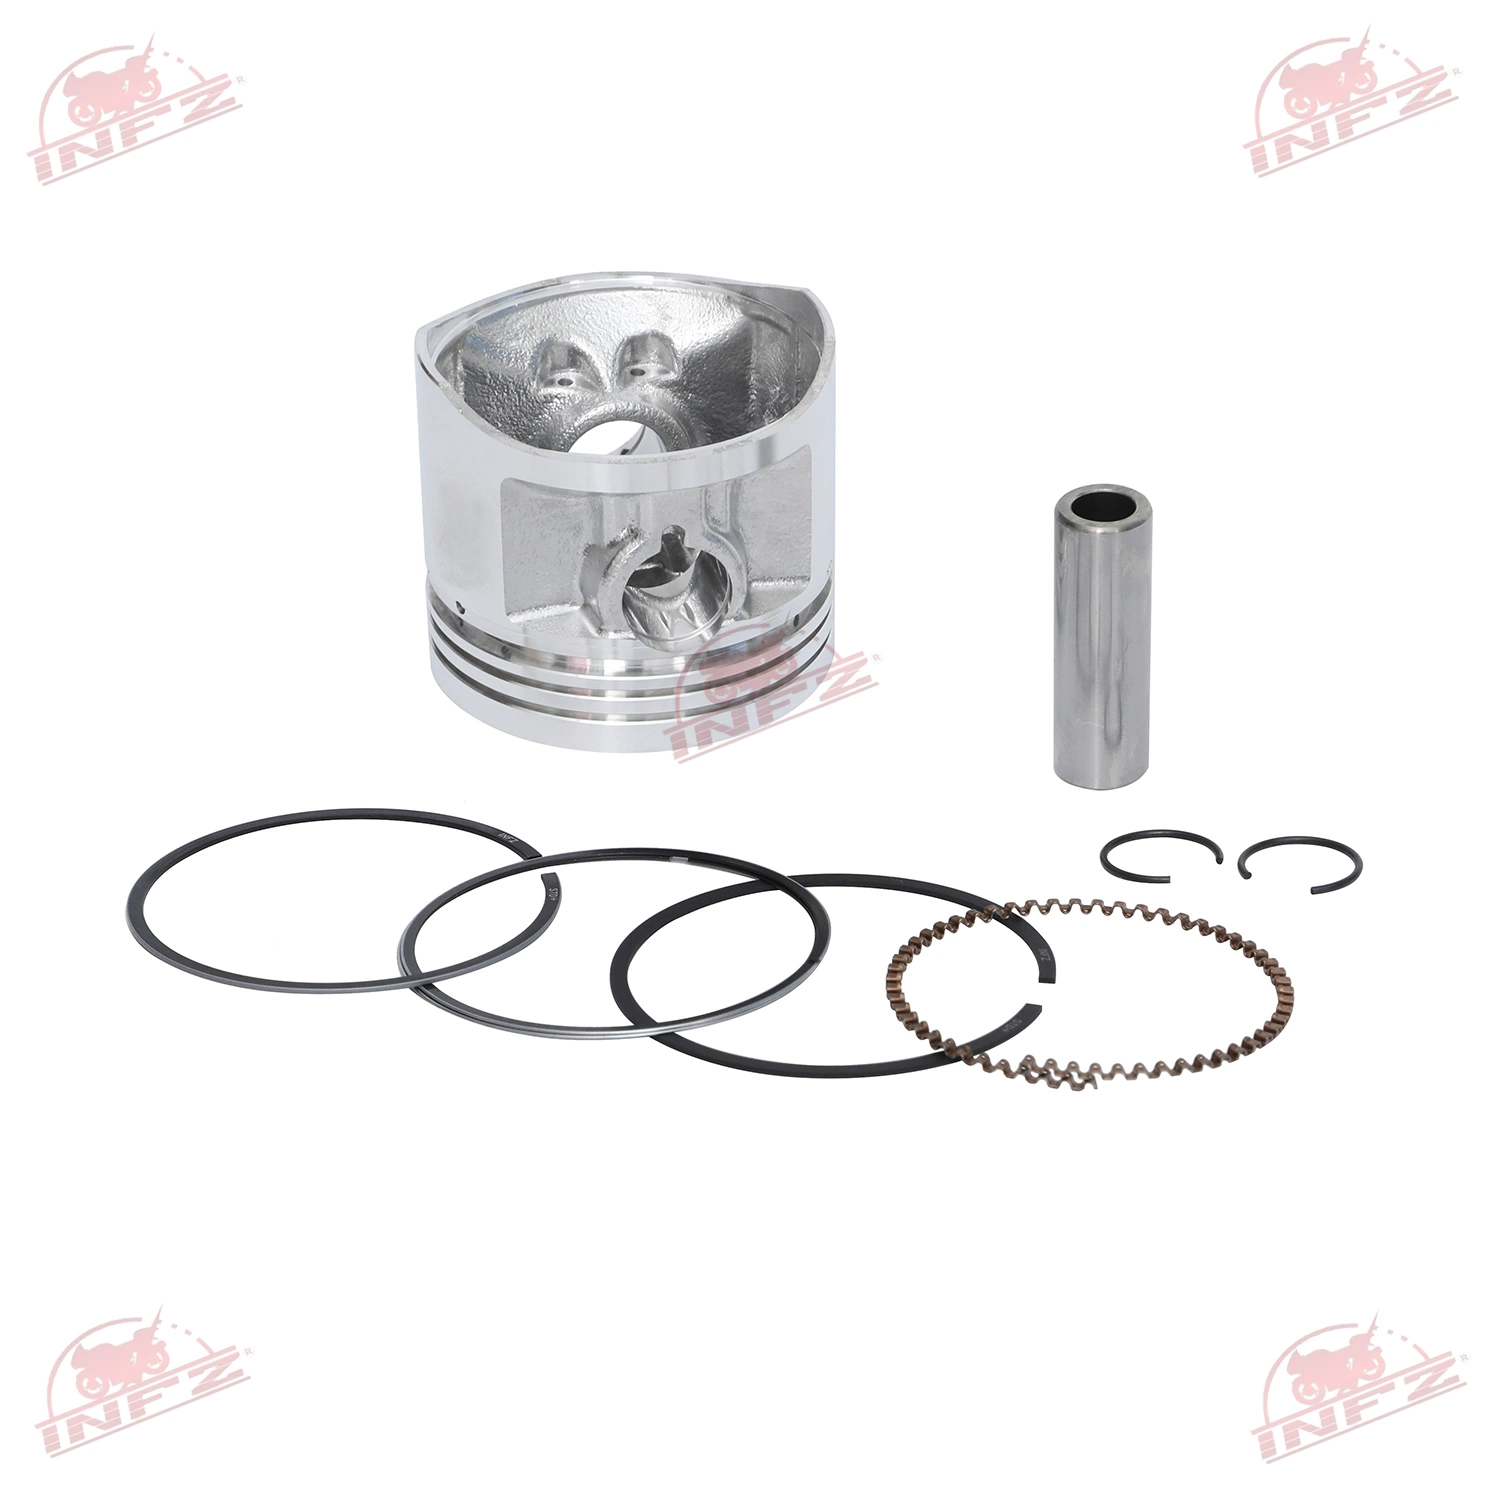 Infz High quality/High cost performance  Motorcycle Engine Spare Parts Cylinder Piston Ring Kit Piston Set for Cg125 56.50mm Cg150 62mm Cg200 63.50mm 125cc 150cc 200cc